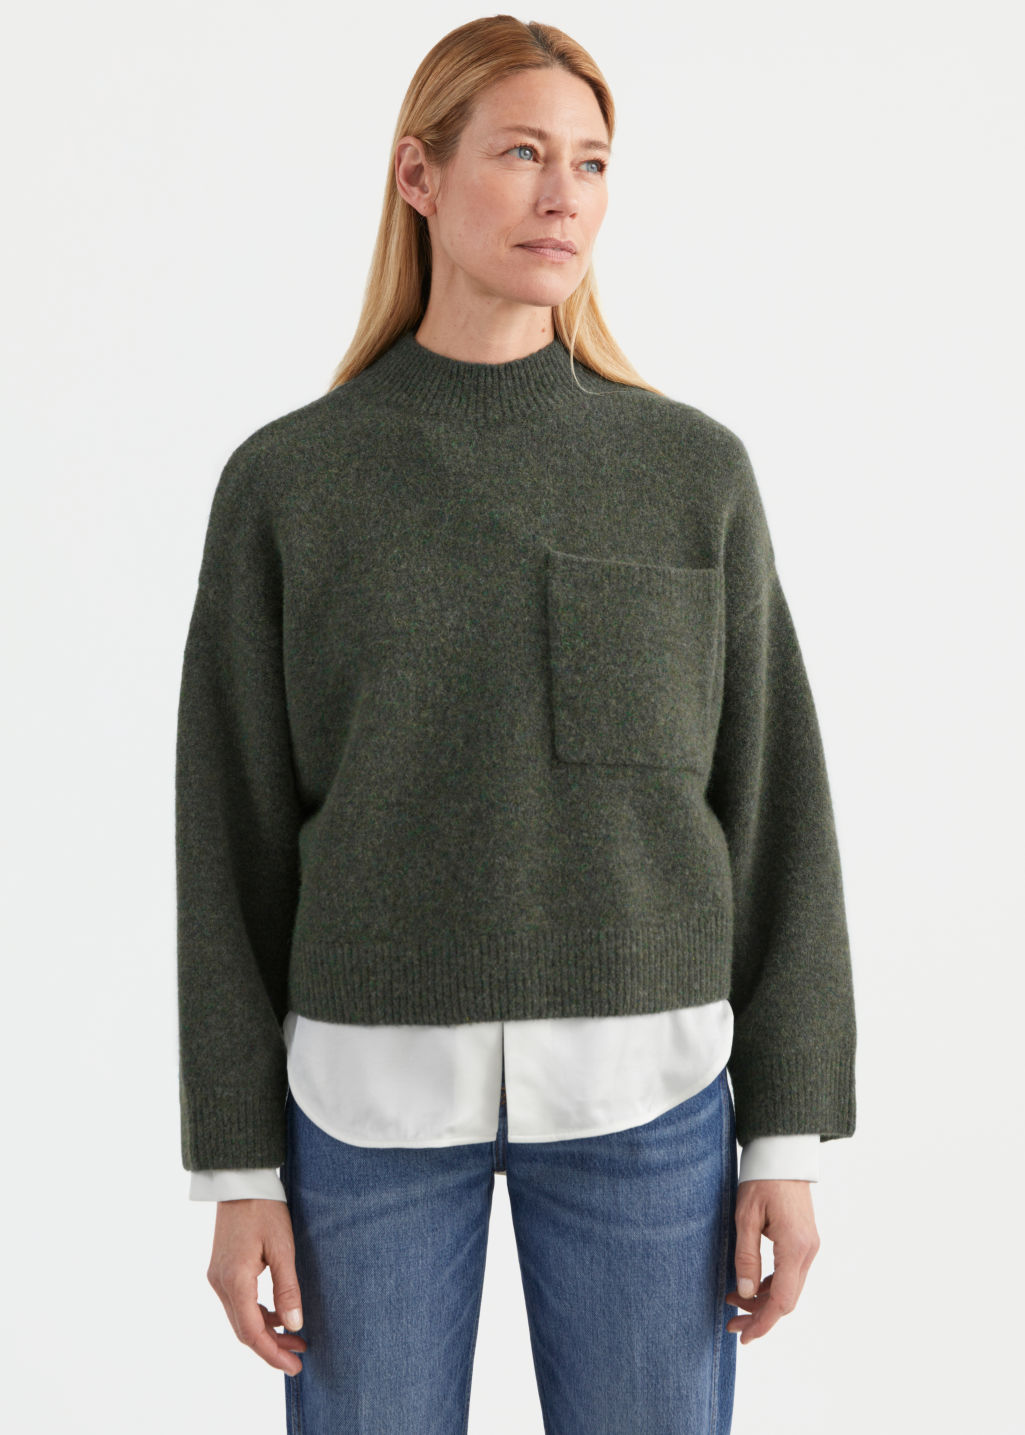 Chest Pocket Knit Sweater - Light Beige - Sweaters - & Other Stories